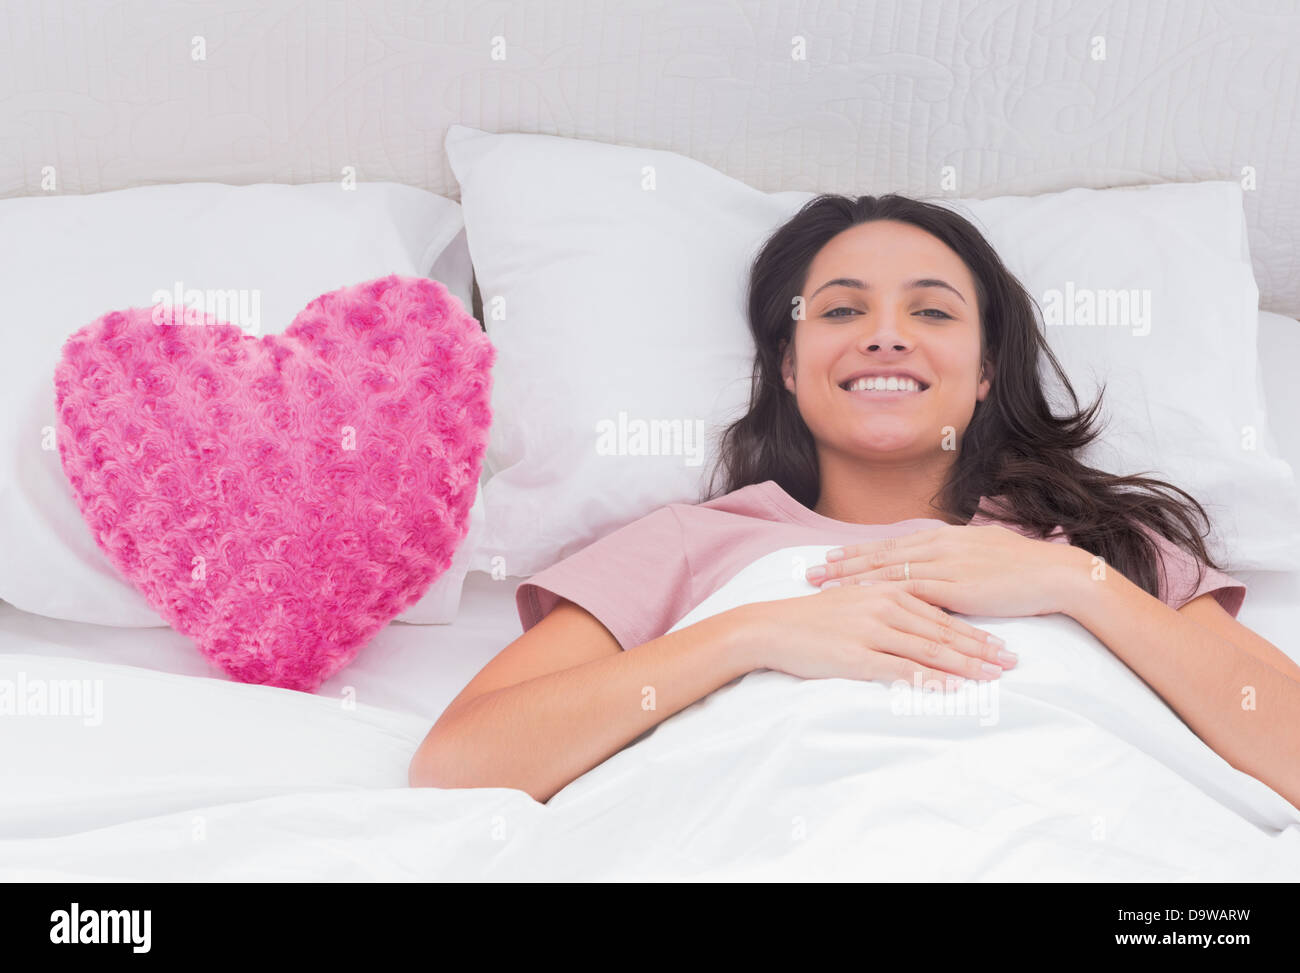 Woman lying in her bed next to a pink heart pillow Stock Photo